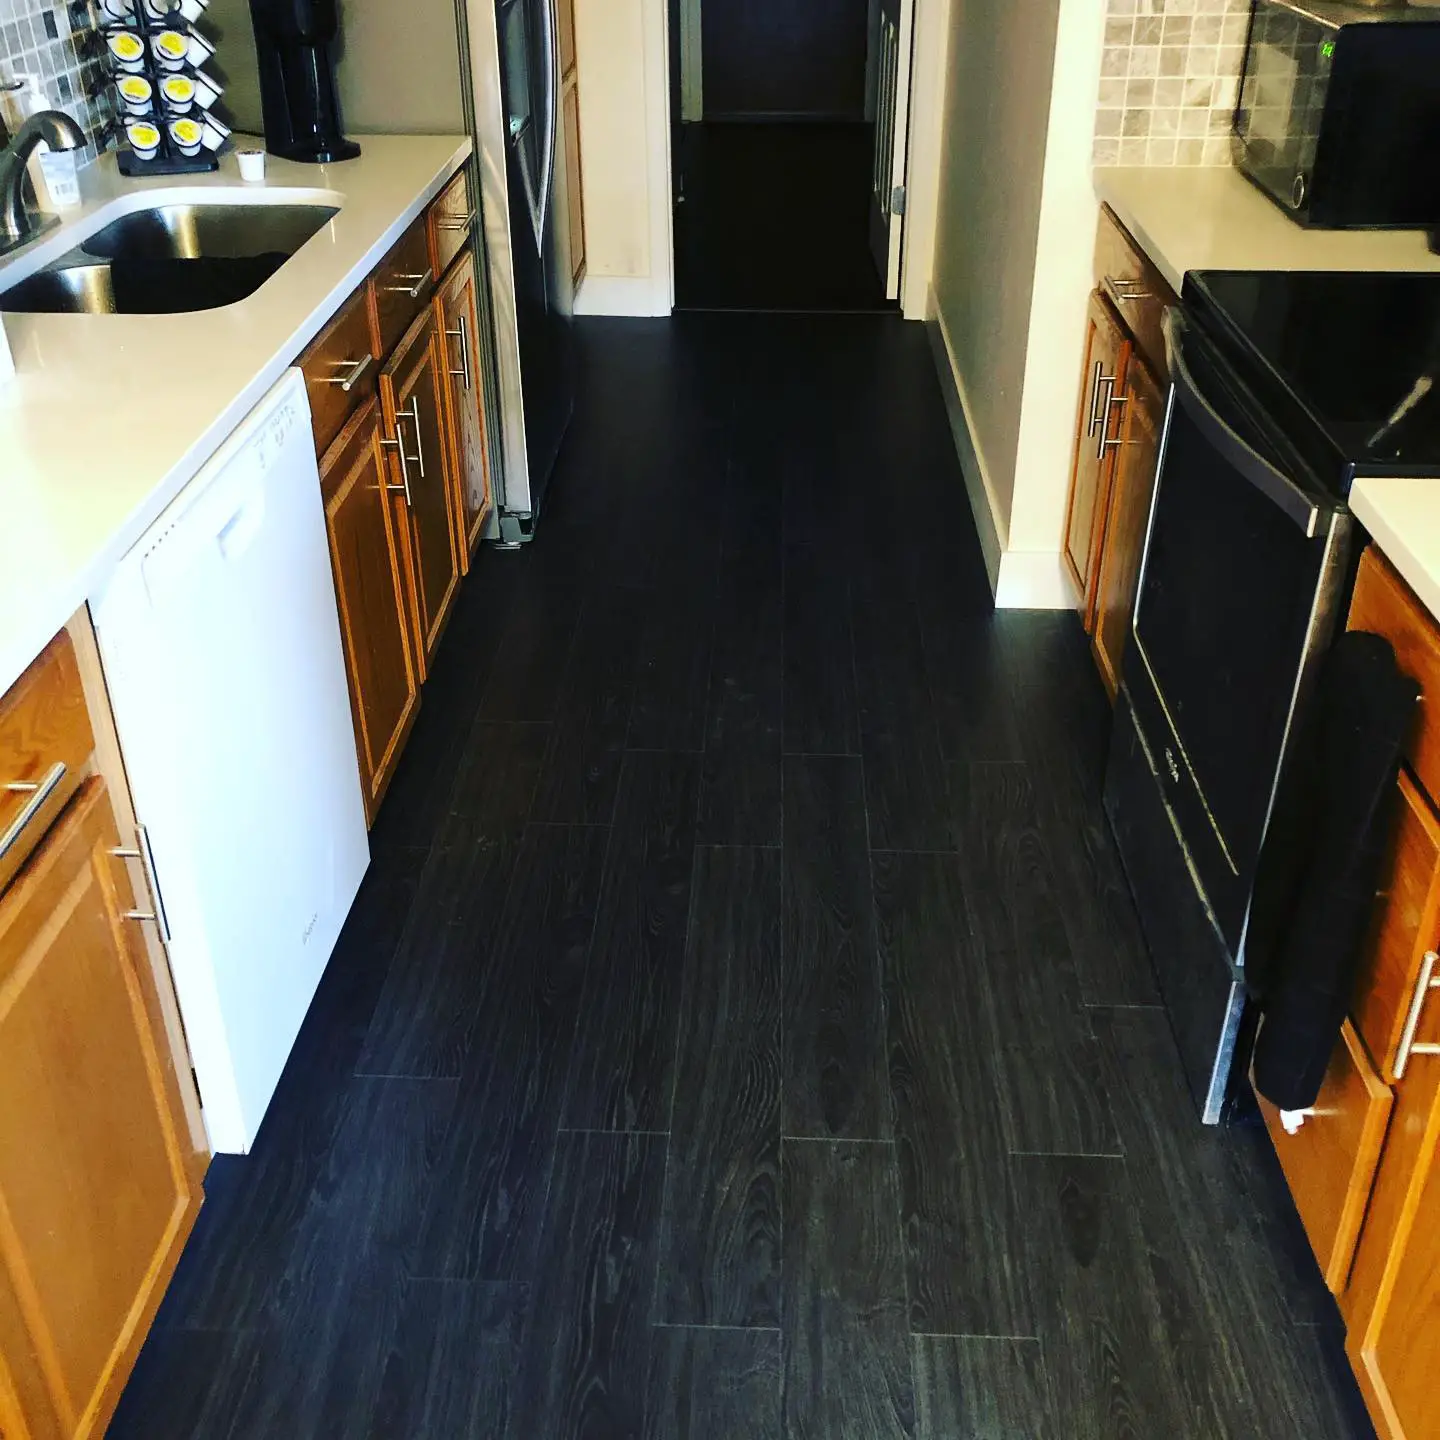 A kitchen with a black floor and wooden cabinets.